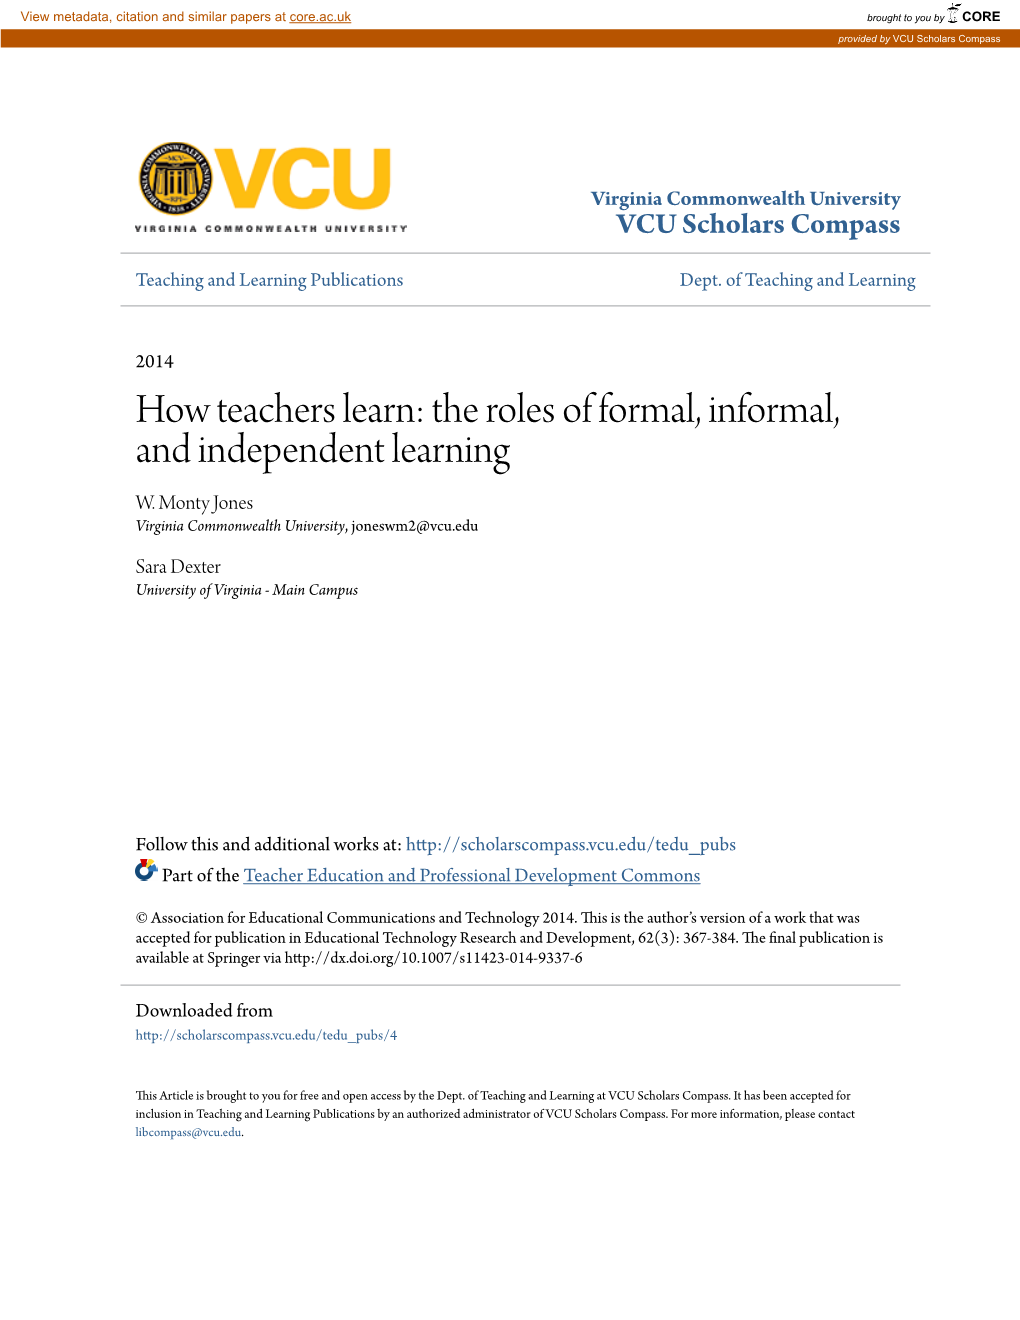 How Teachers Learn: the Roles of Formal, Informal, and Independent Learning W